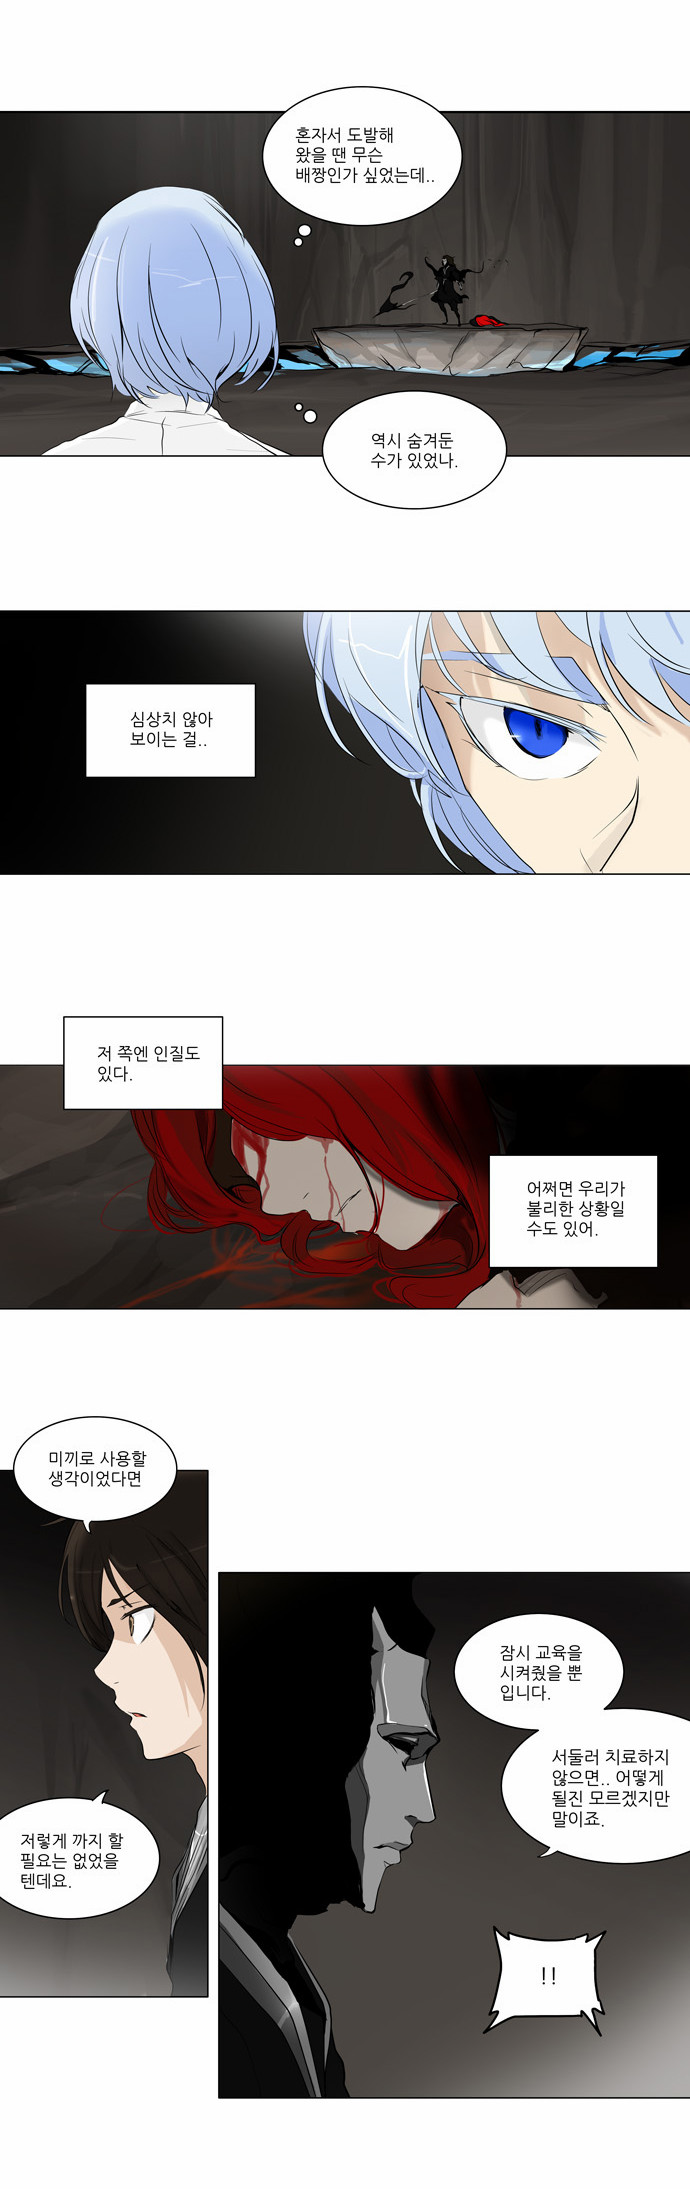 Tower of God - Chapter 182 - Page 2